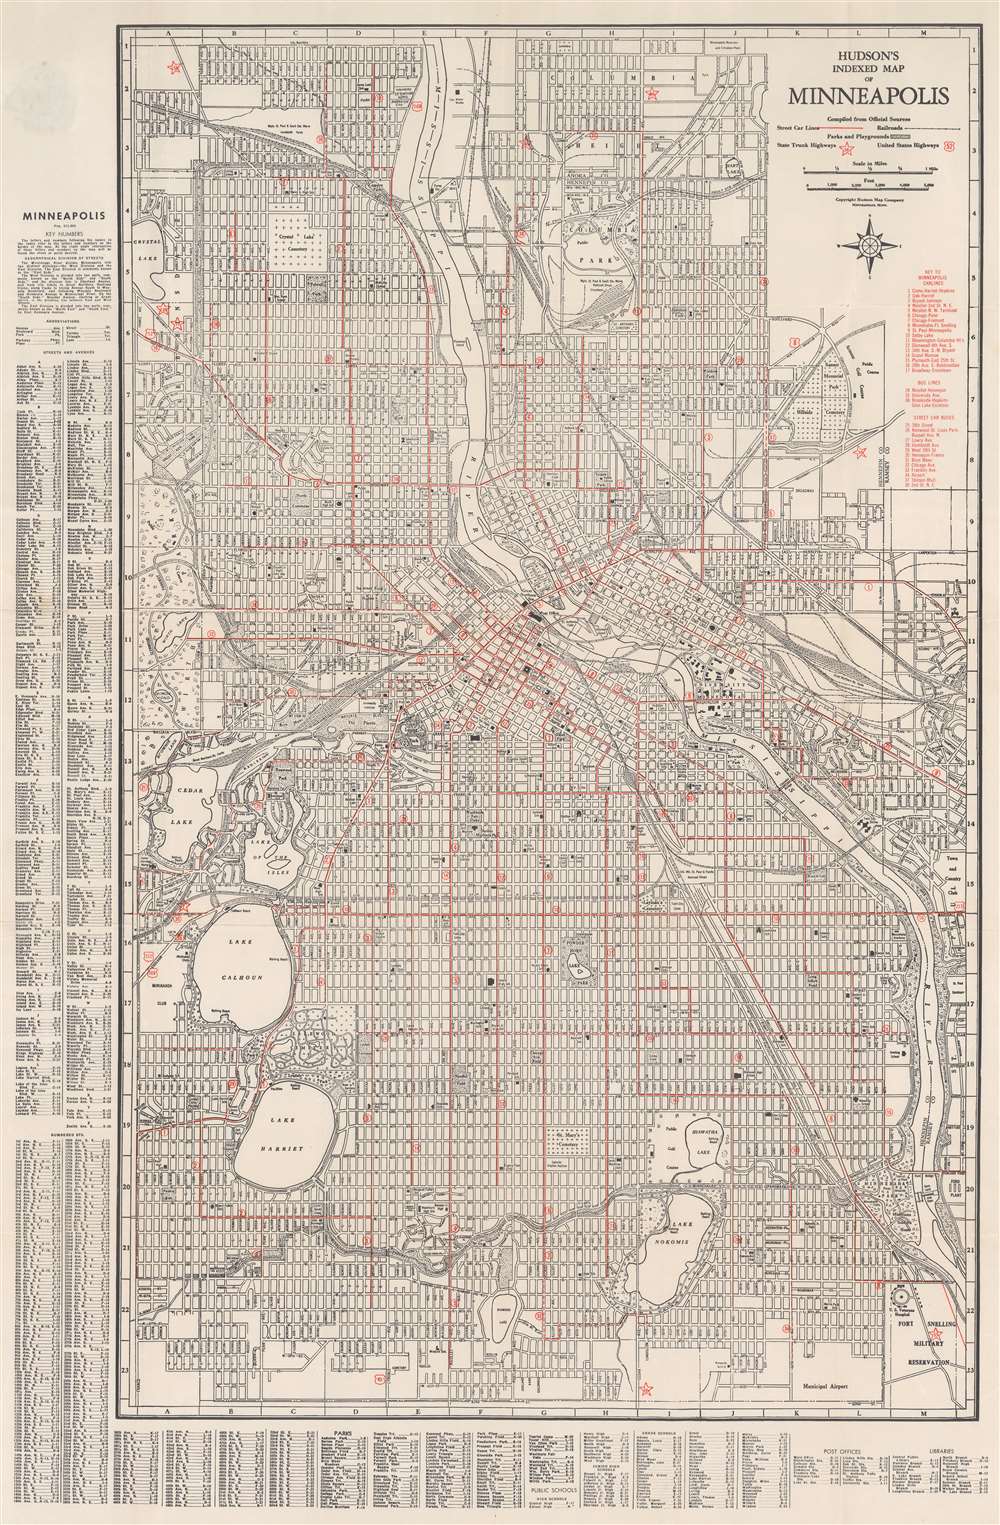 Hudson's Indexed Map of Minneapolis. - Main View